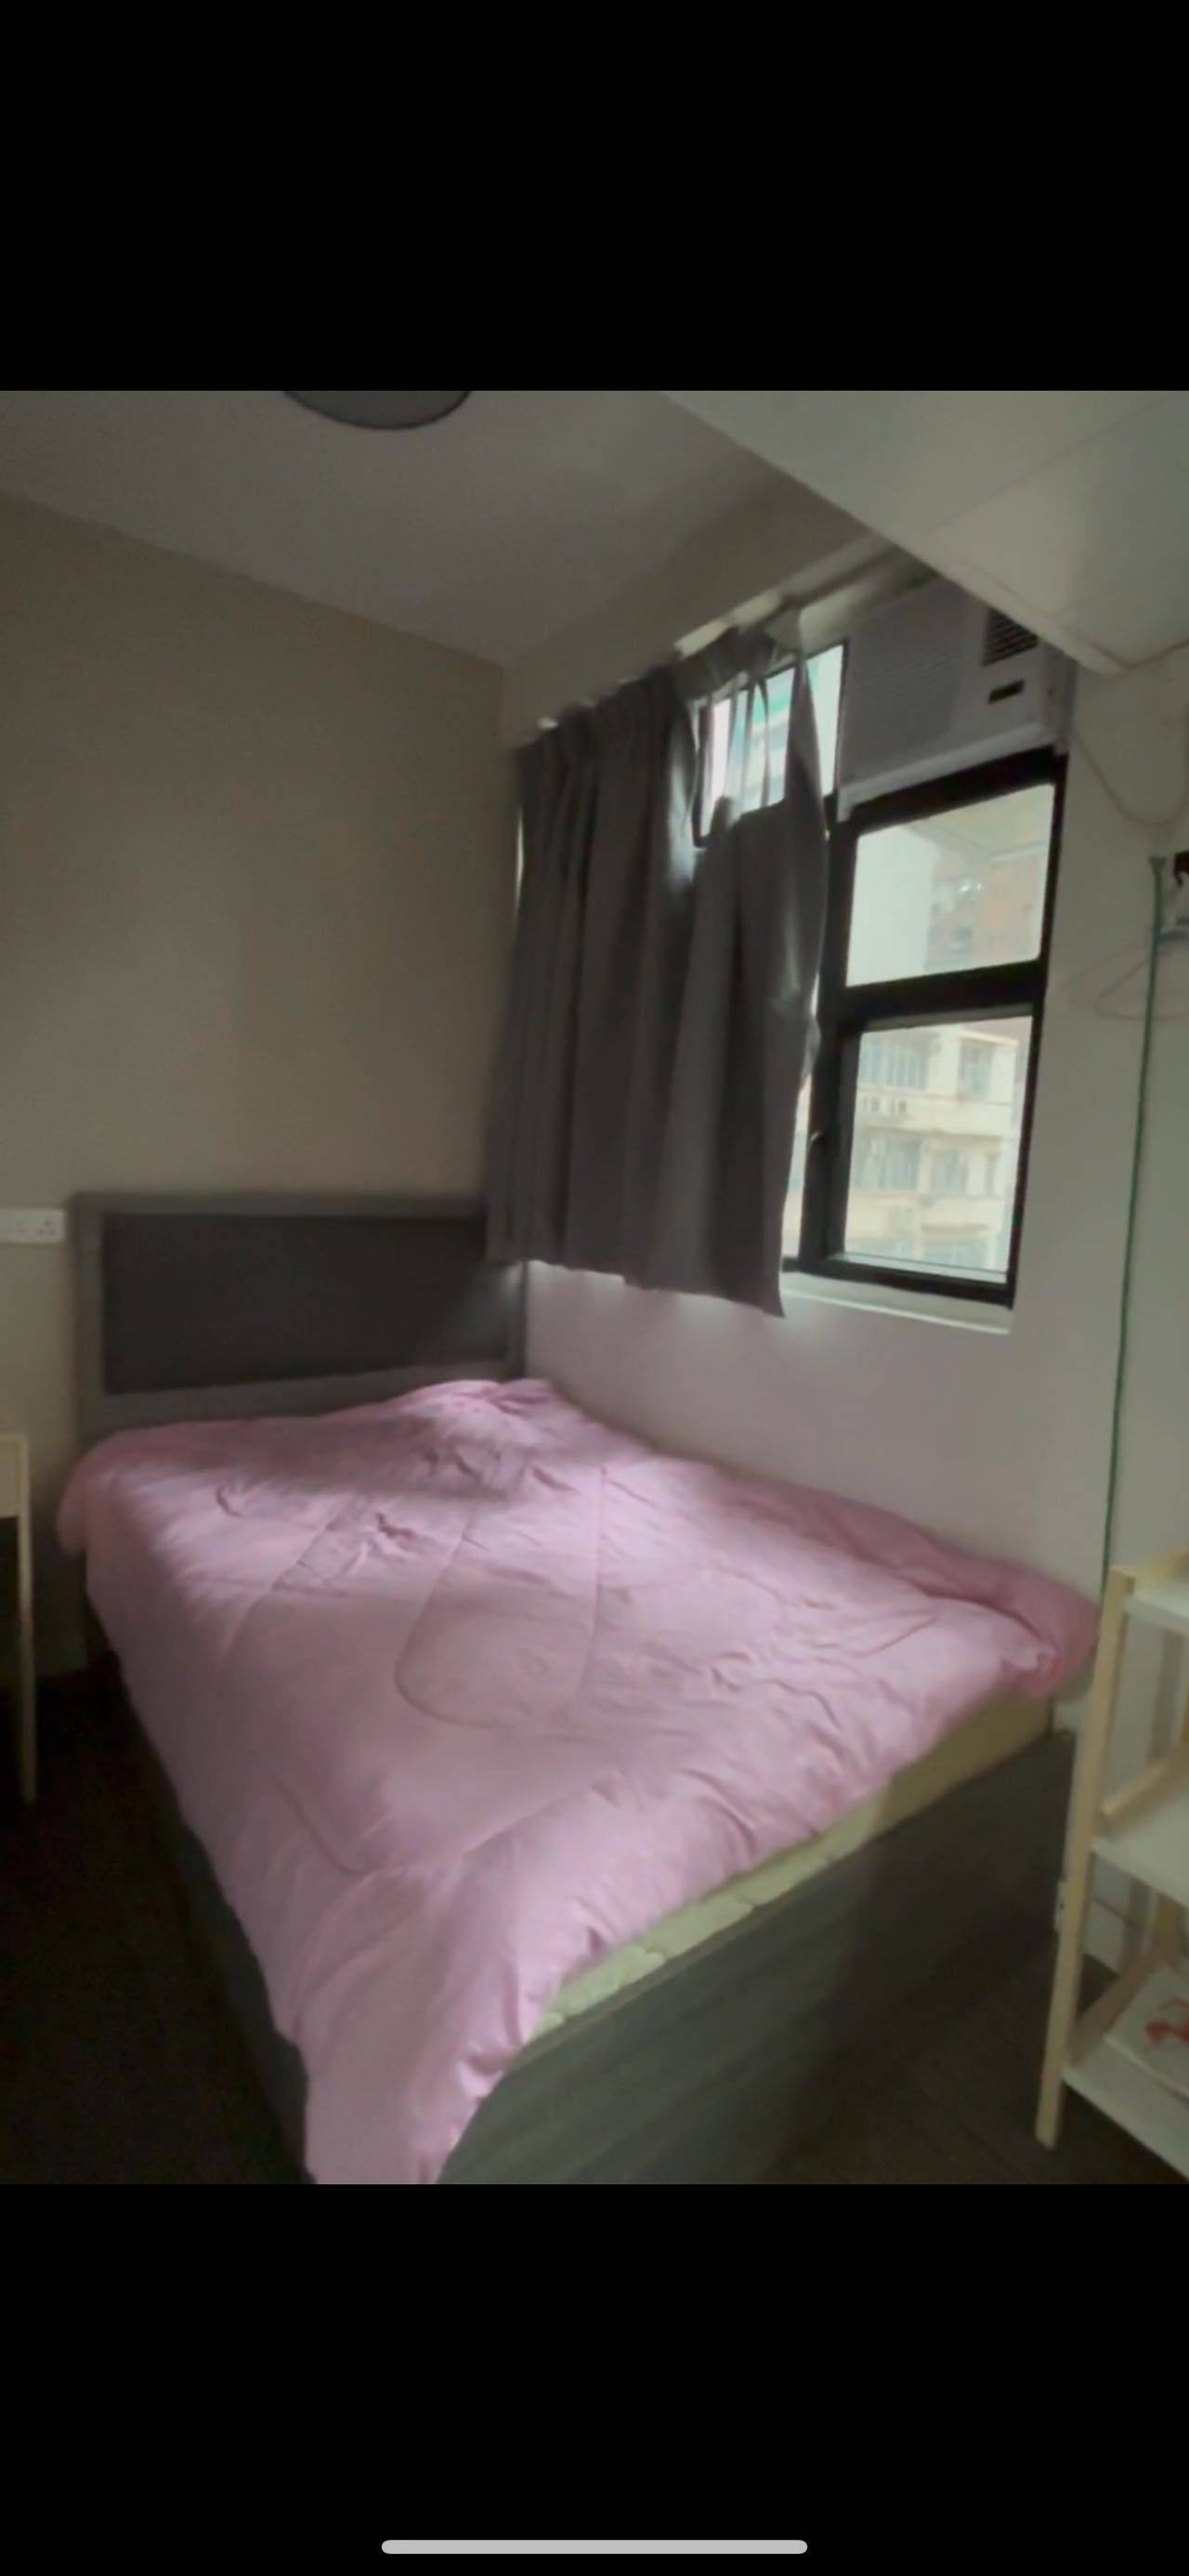 Hong Kong-Kowloon-Cozy Home,Clean&Comfy,Chilled